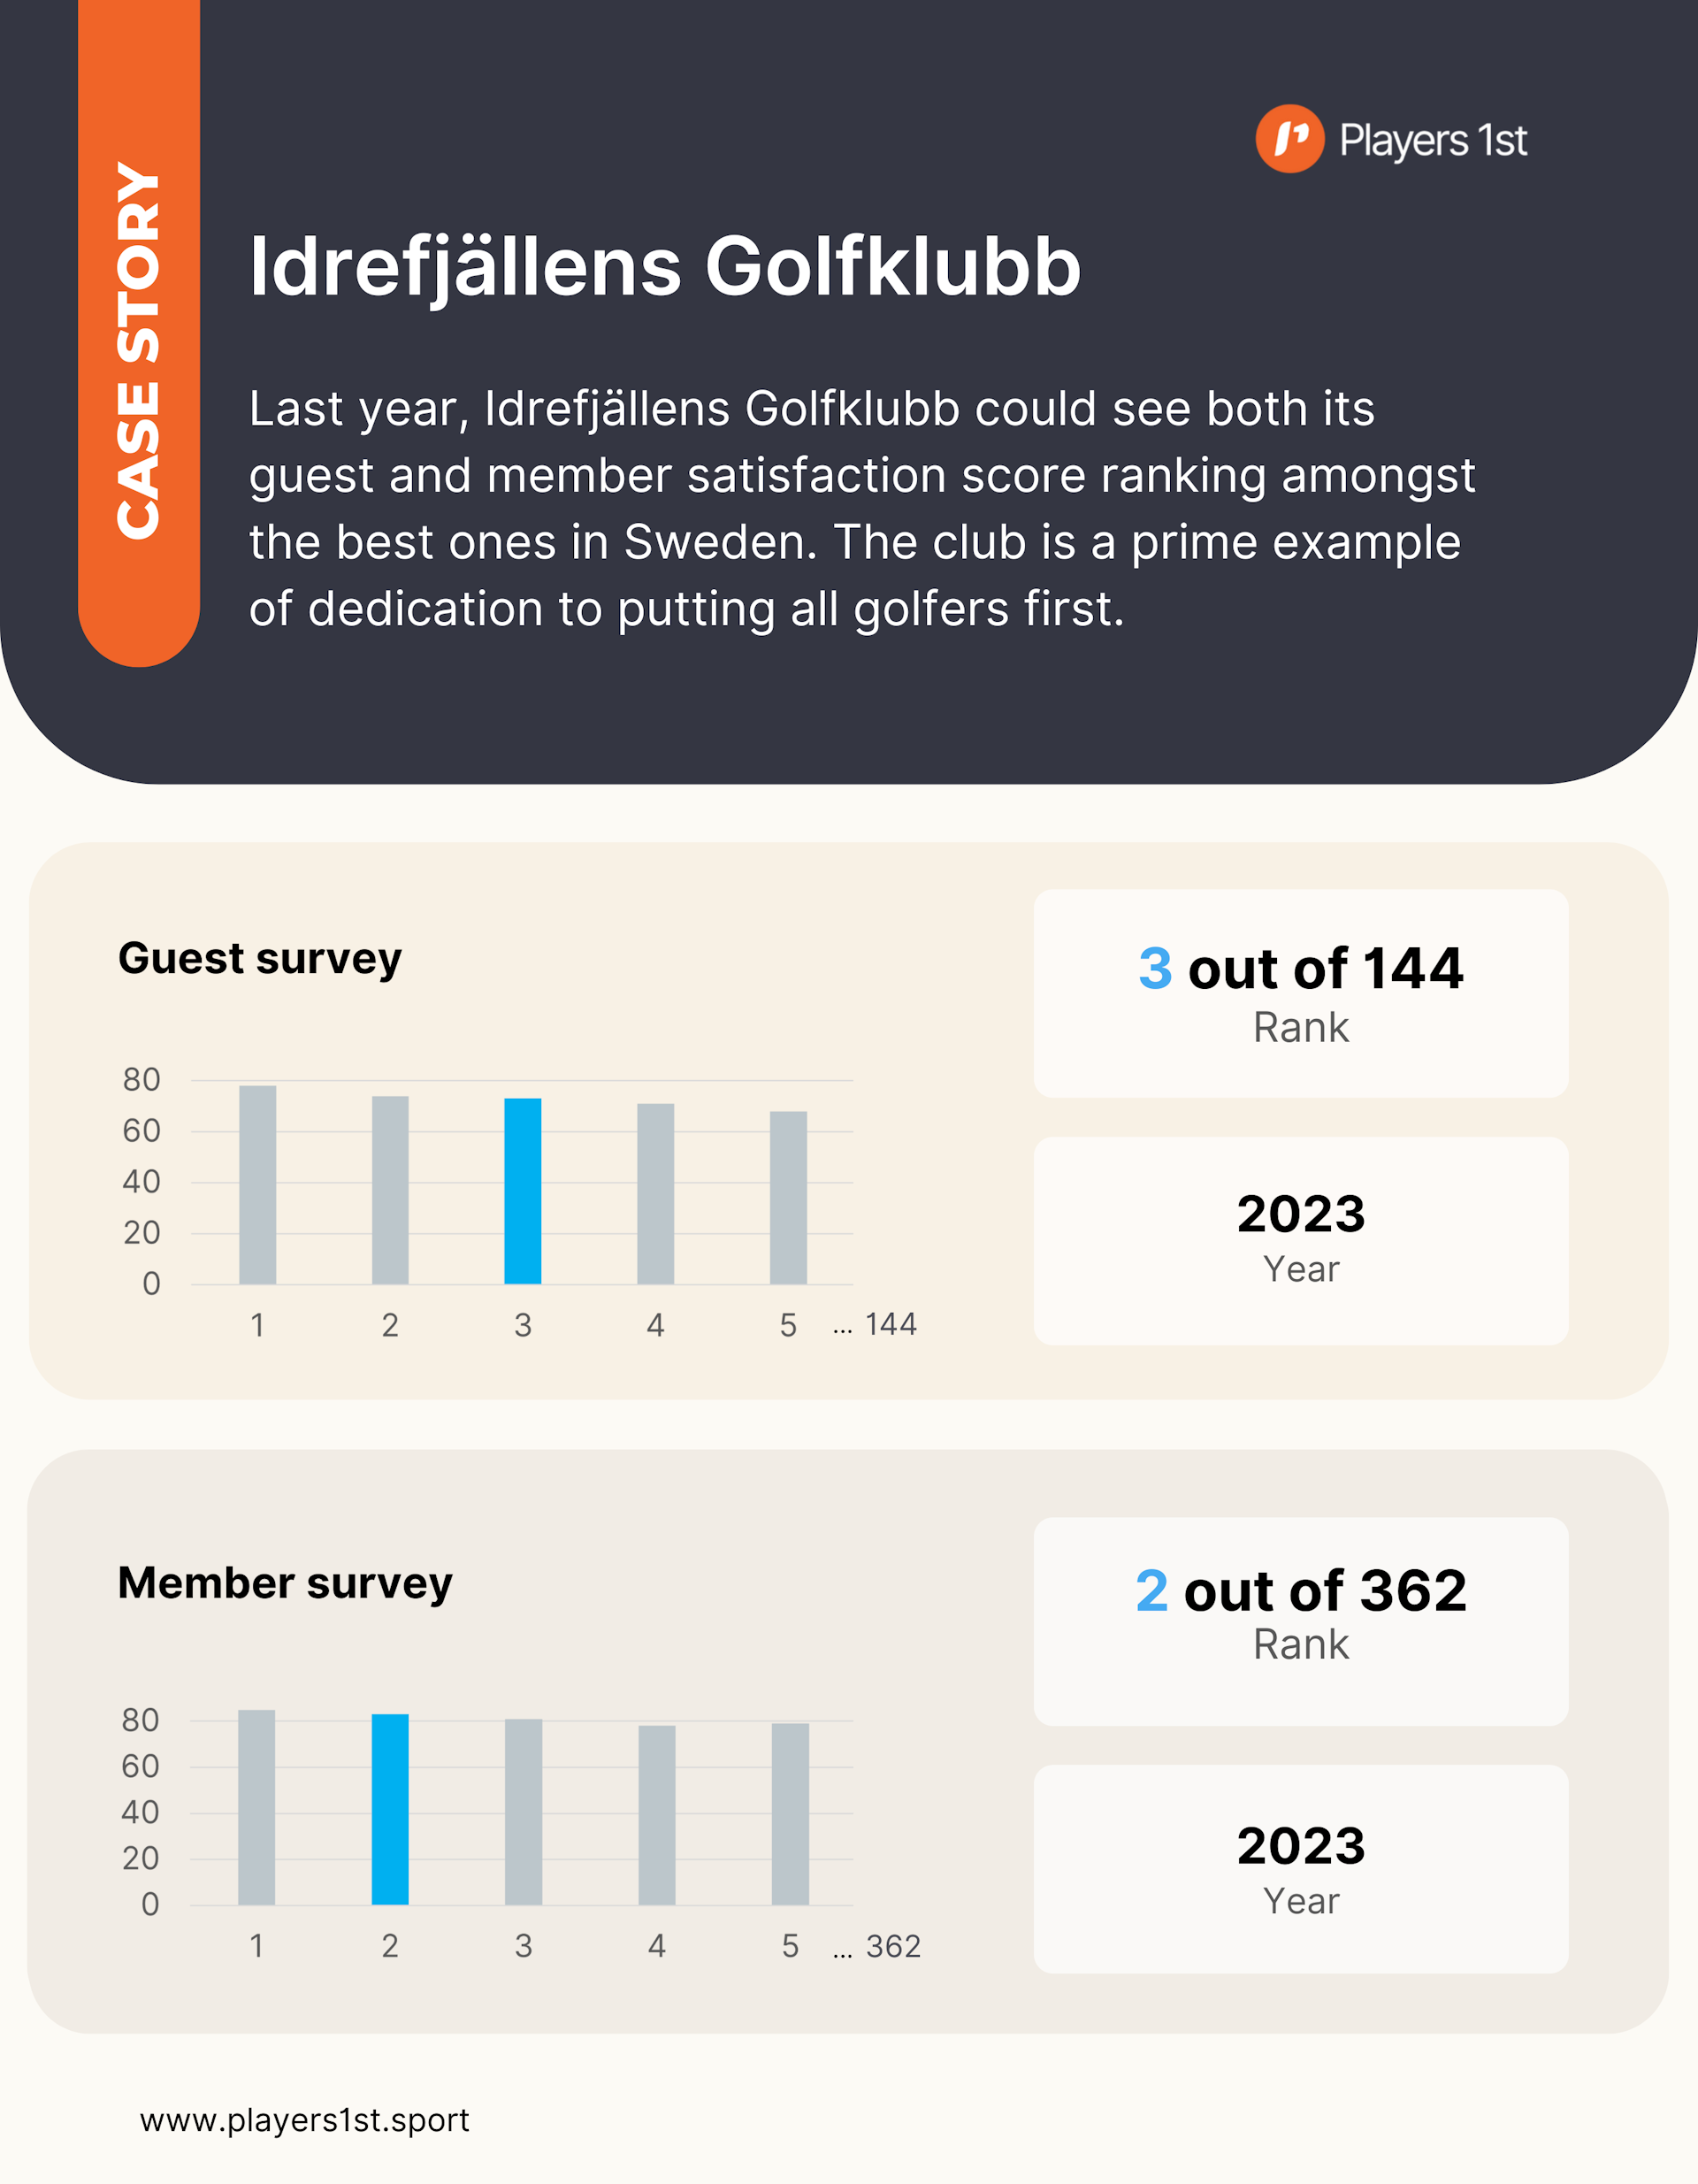 Figure 1: The ranking of Idrefjällens Golfklubb's guest and member satisfaction score in 2023. Source: Players 1st